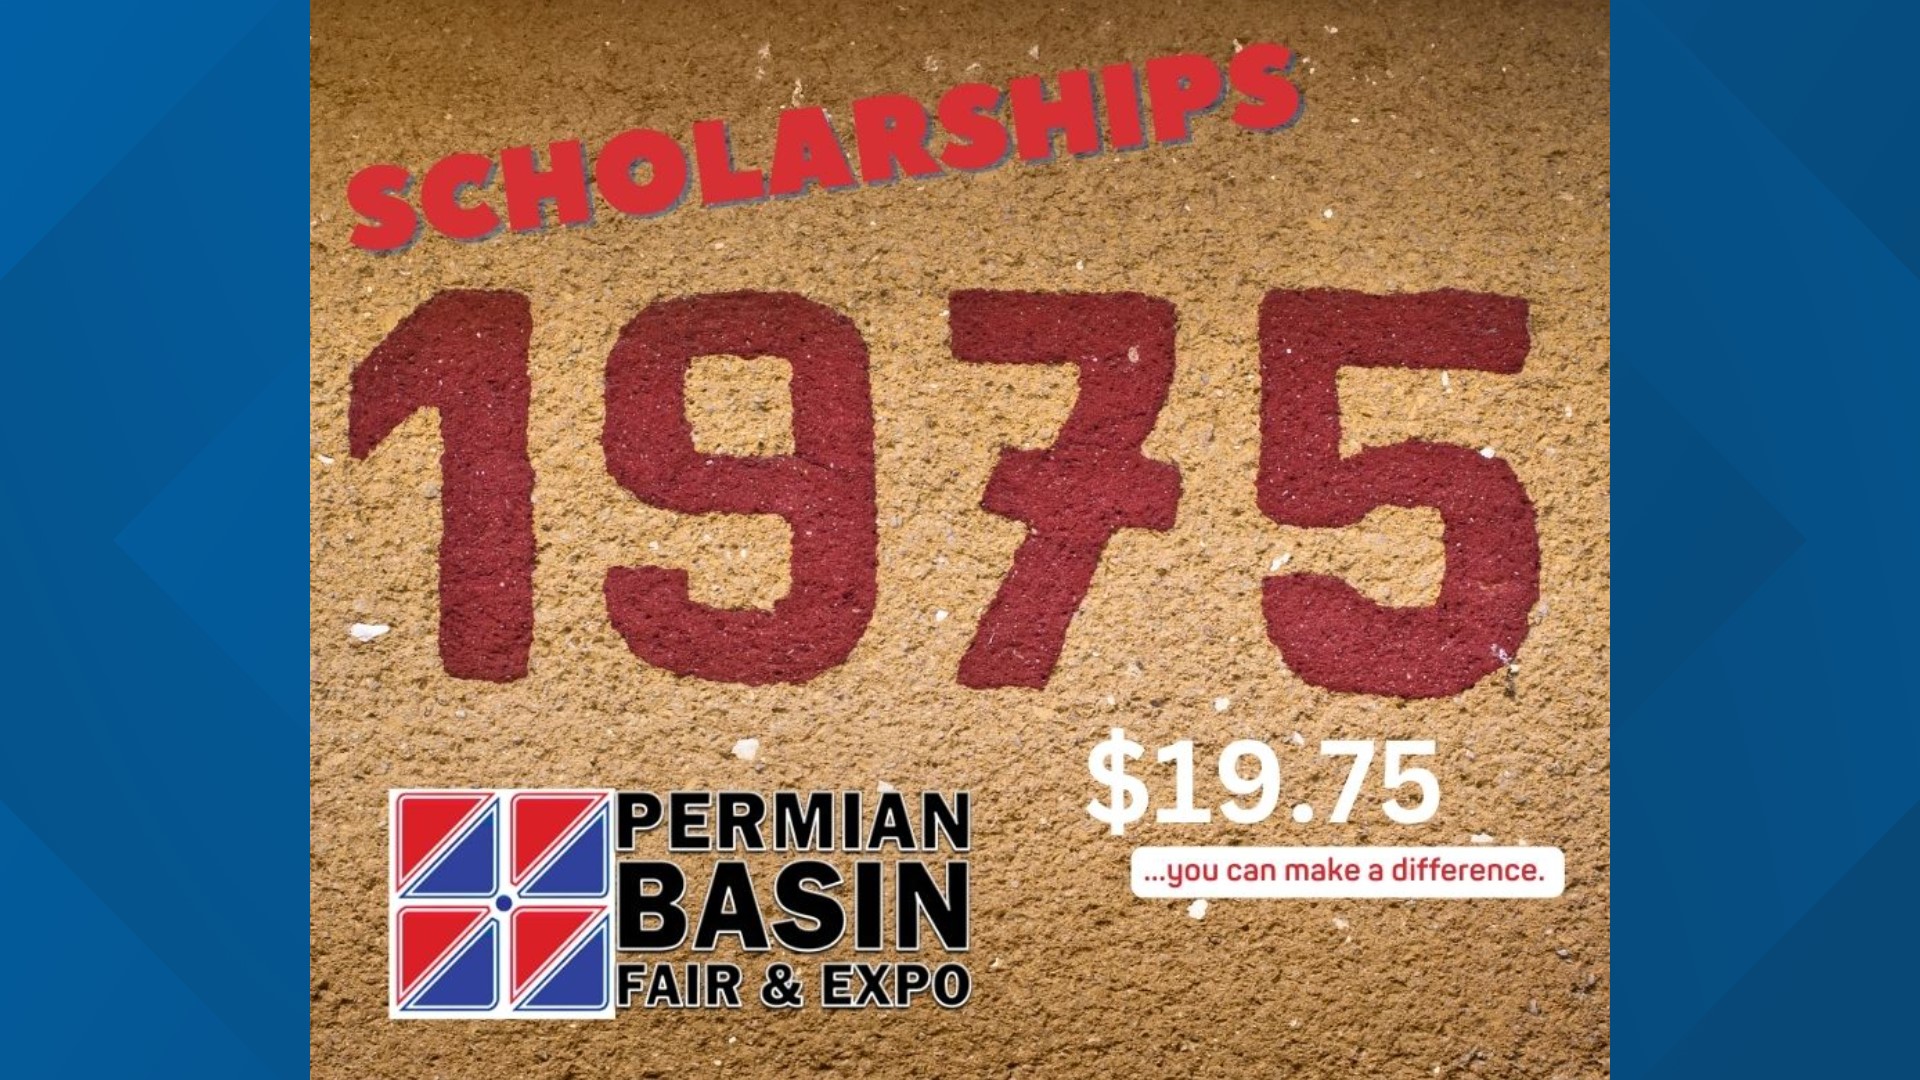 The fair has launched a new creative scholarship initiative.